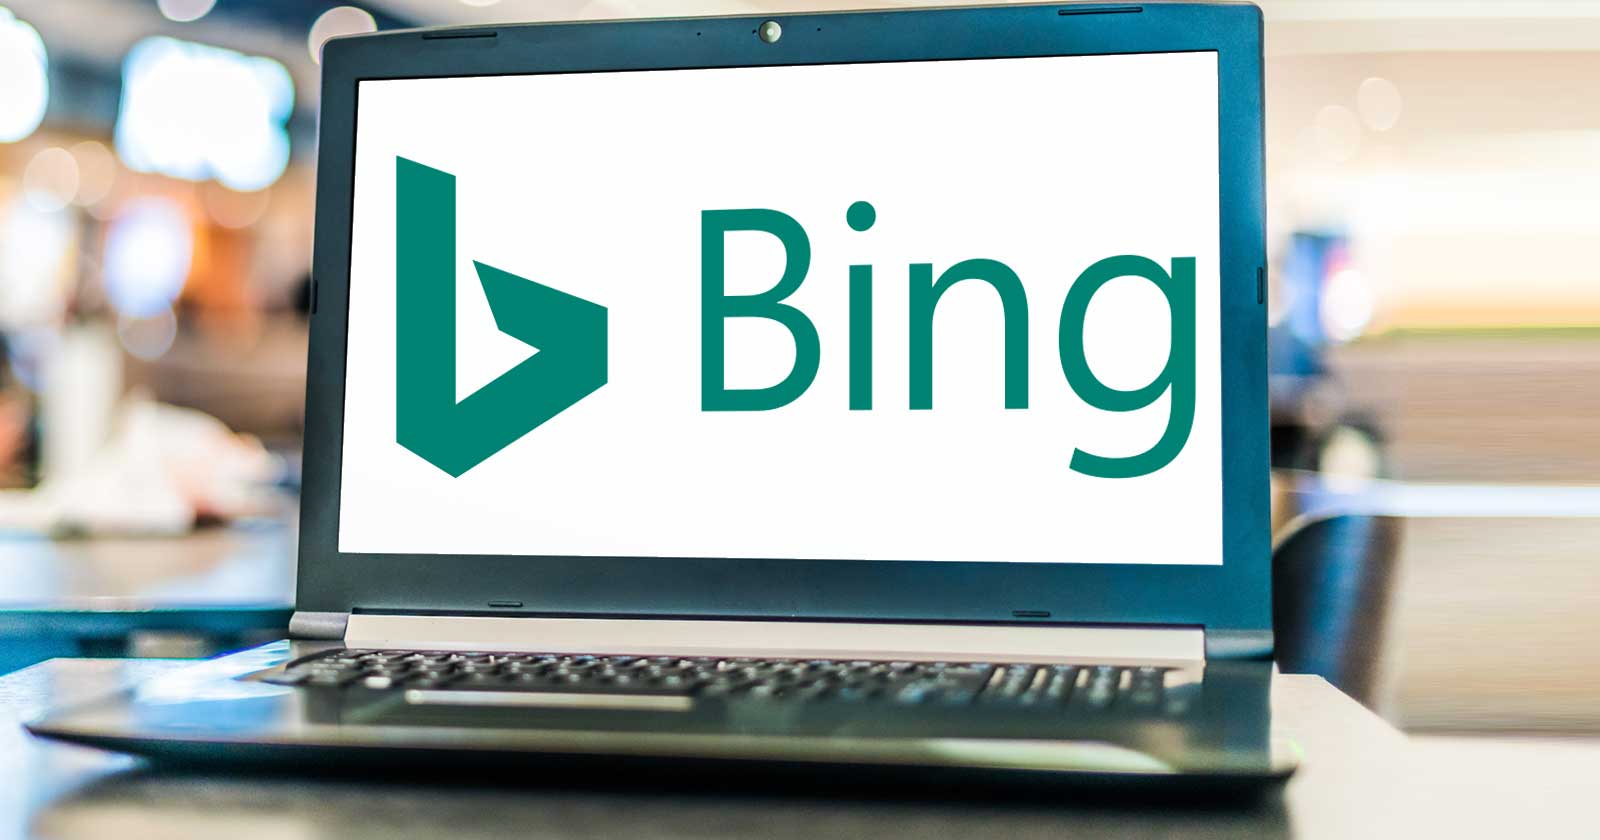 Image of a laptop with logo and name of the Bing search engine